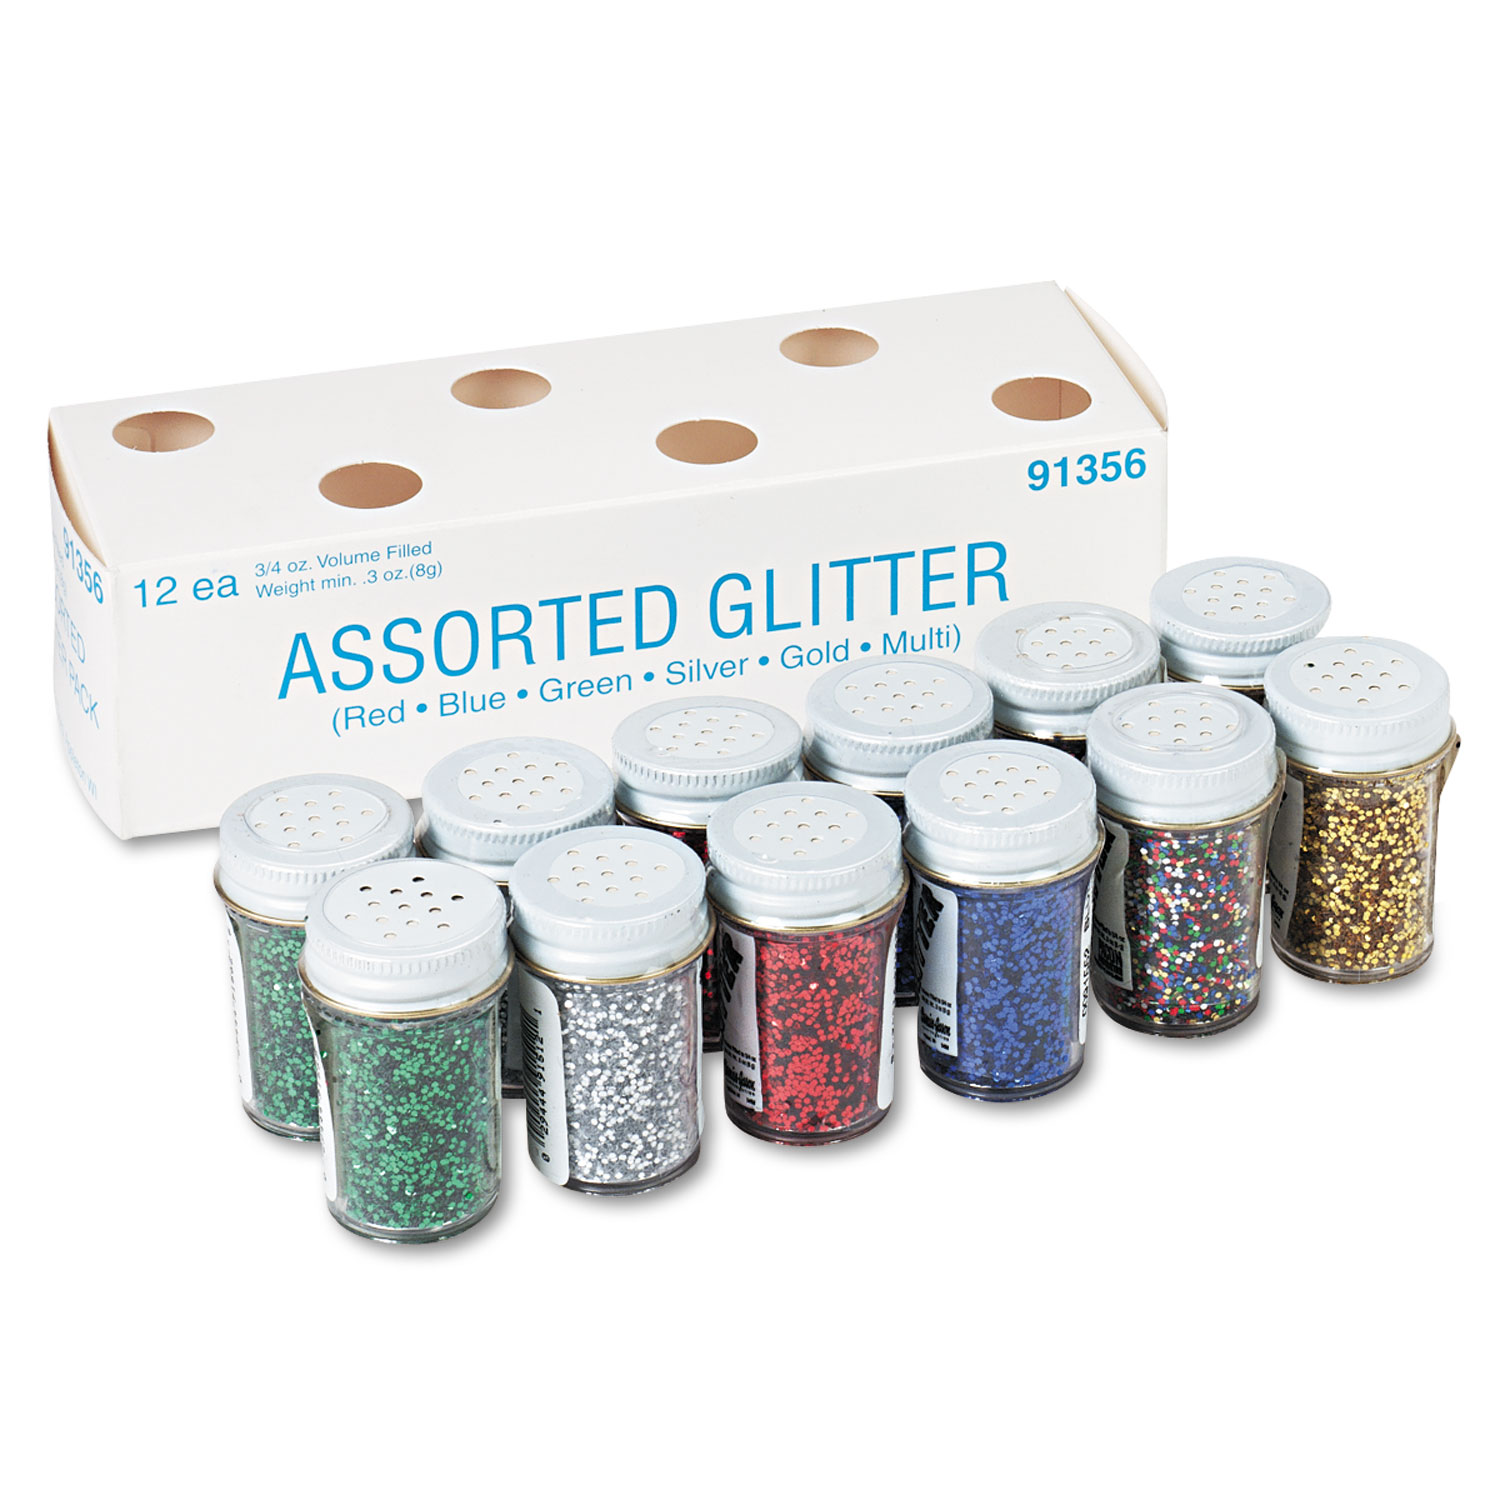  Pacon 91356 Spectra Glitter, .04 Hexagon Crystals, Assorted, .75 oz Shaker-Top Jar, 12/Pack (PAC91356) 